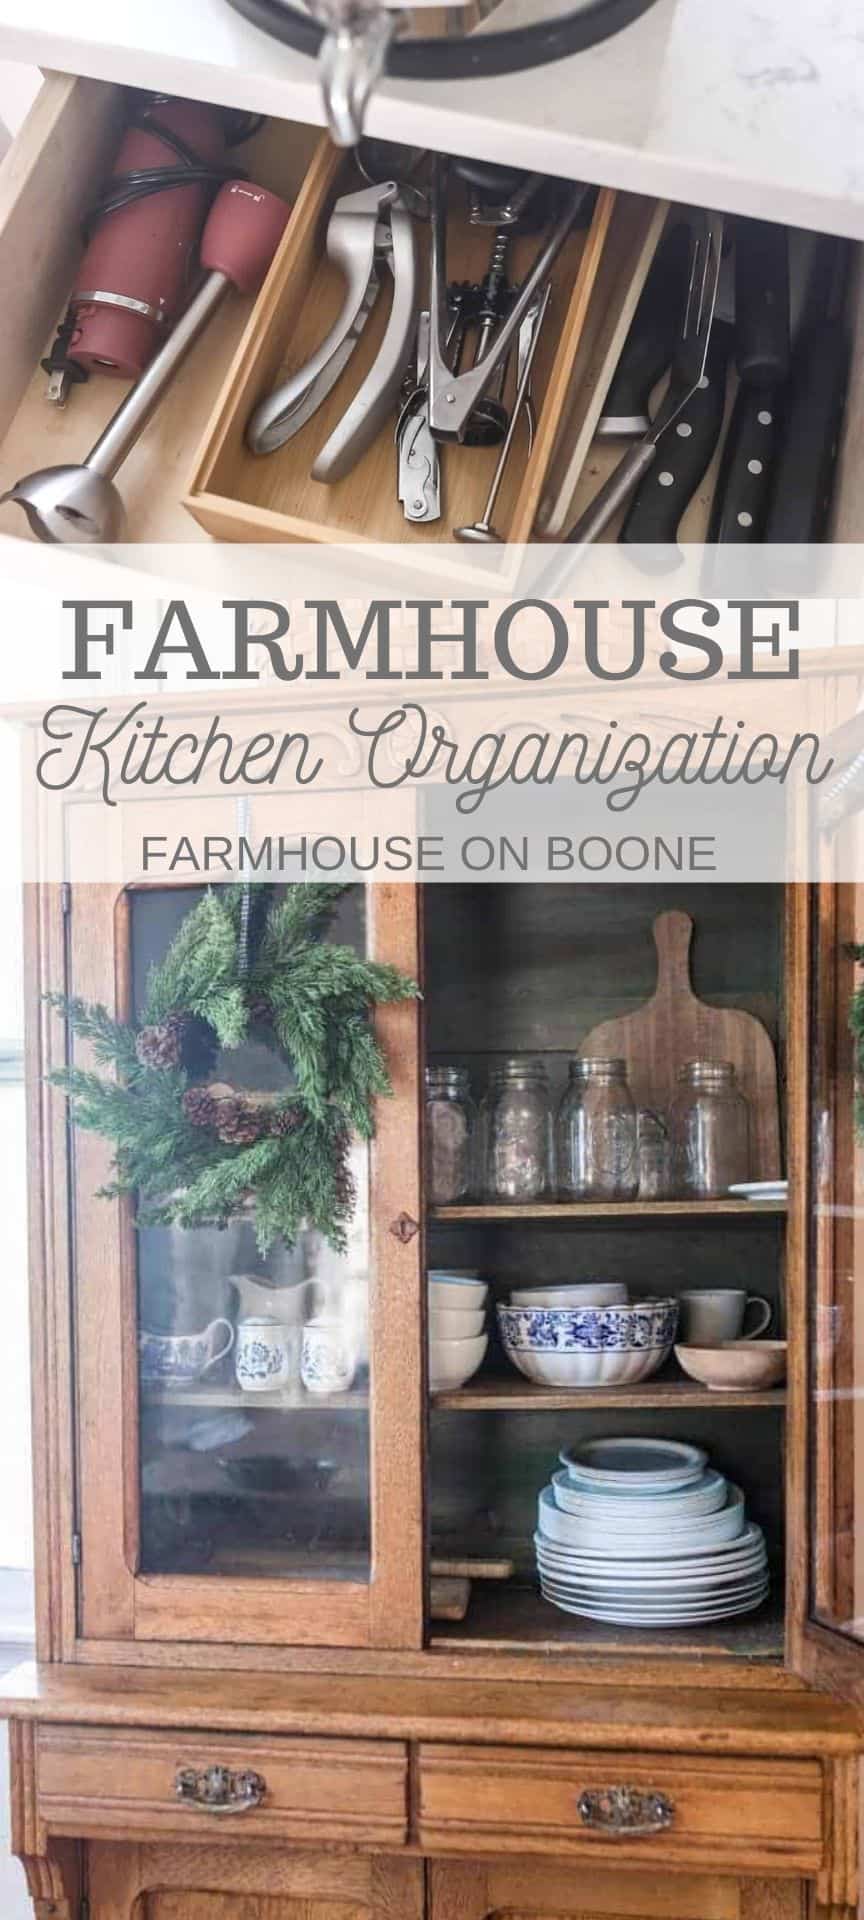 Farmhouse Inspired Kitchen Towels - The Happy Scraps